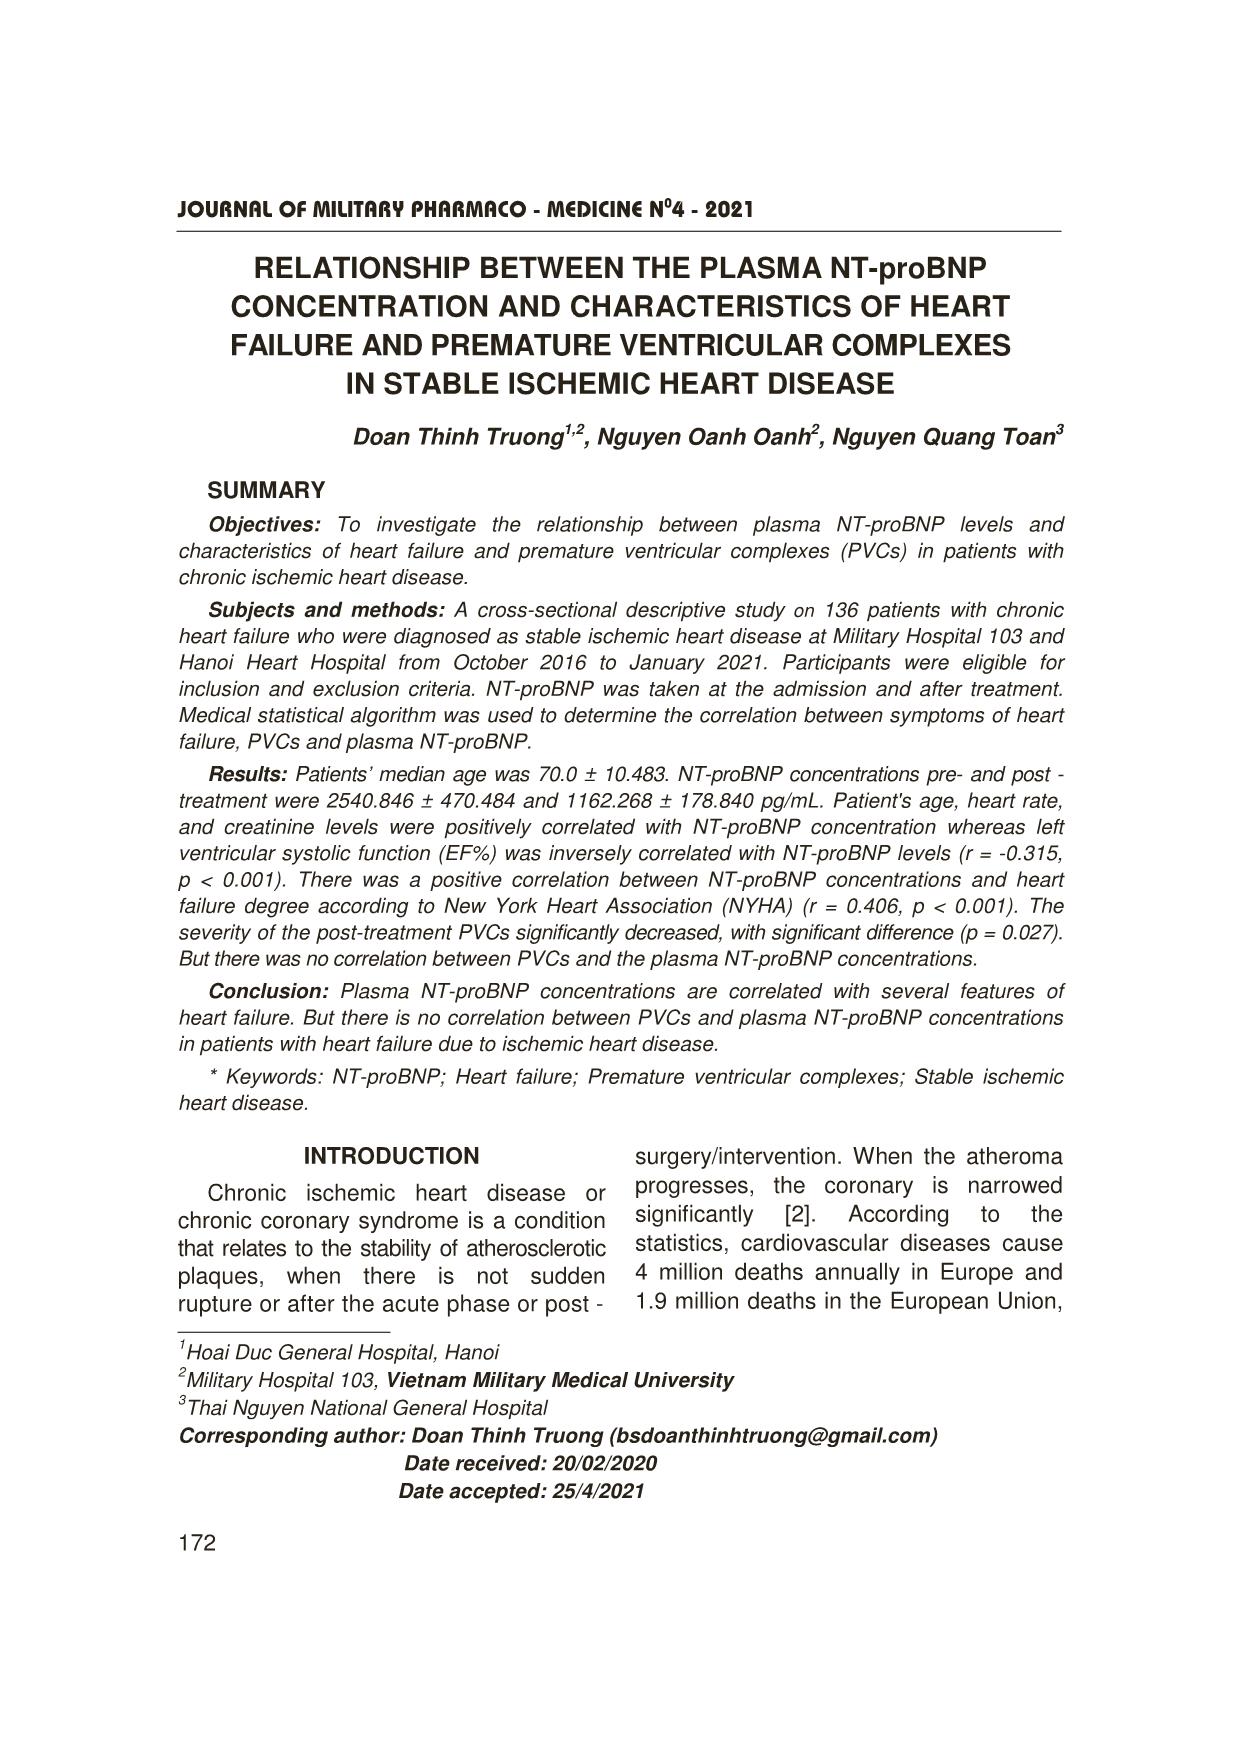 Relationship between the plasma nt-Probnp concentration and characteristics of heart failure and premature ventricular complexes in stable ischemic heart disease trang 1